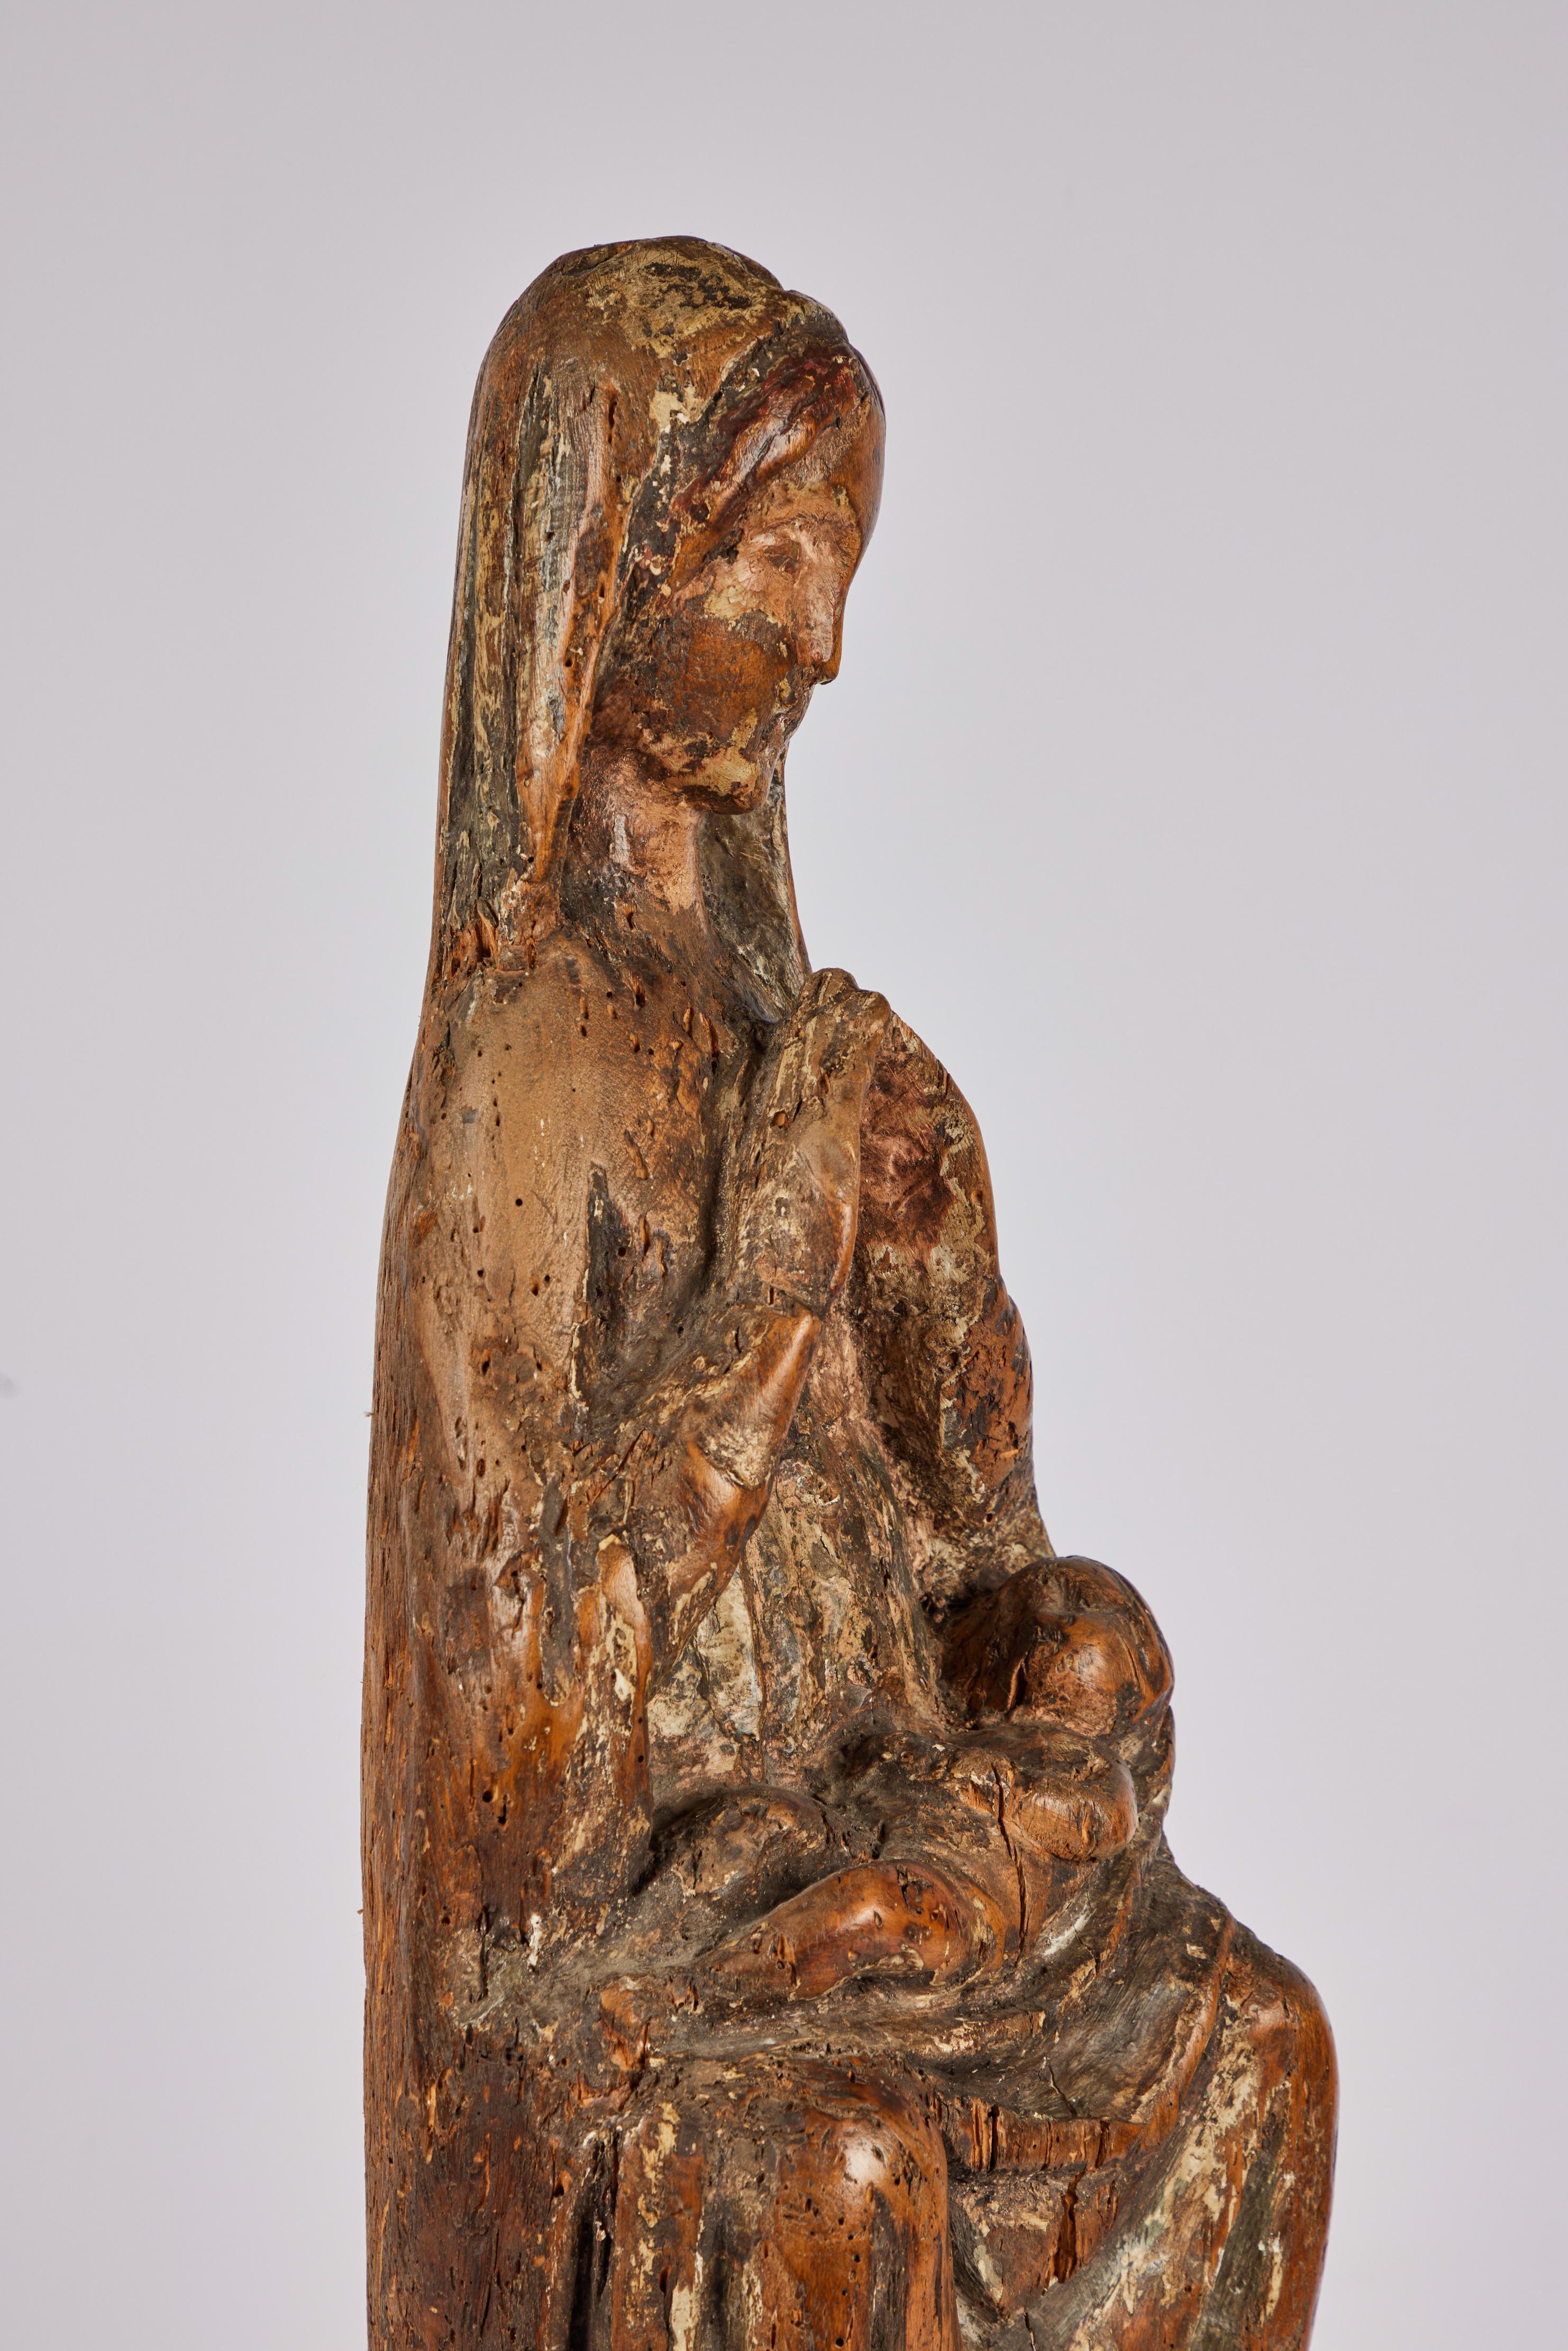 An evocative, 14th century, carved wood statue of a seated Mary with the Christ child in her lap. The piece with a beautiful patina featuring polychrome paint traces. Now mounted on a contemporary, stepped Lucite base.

Mounted: 31.25